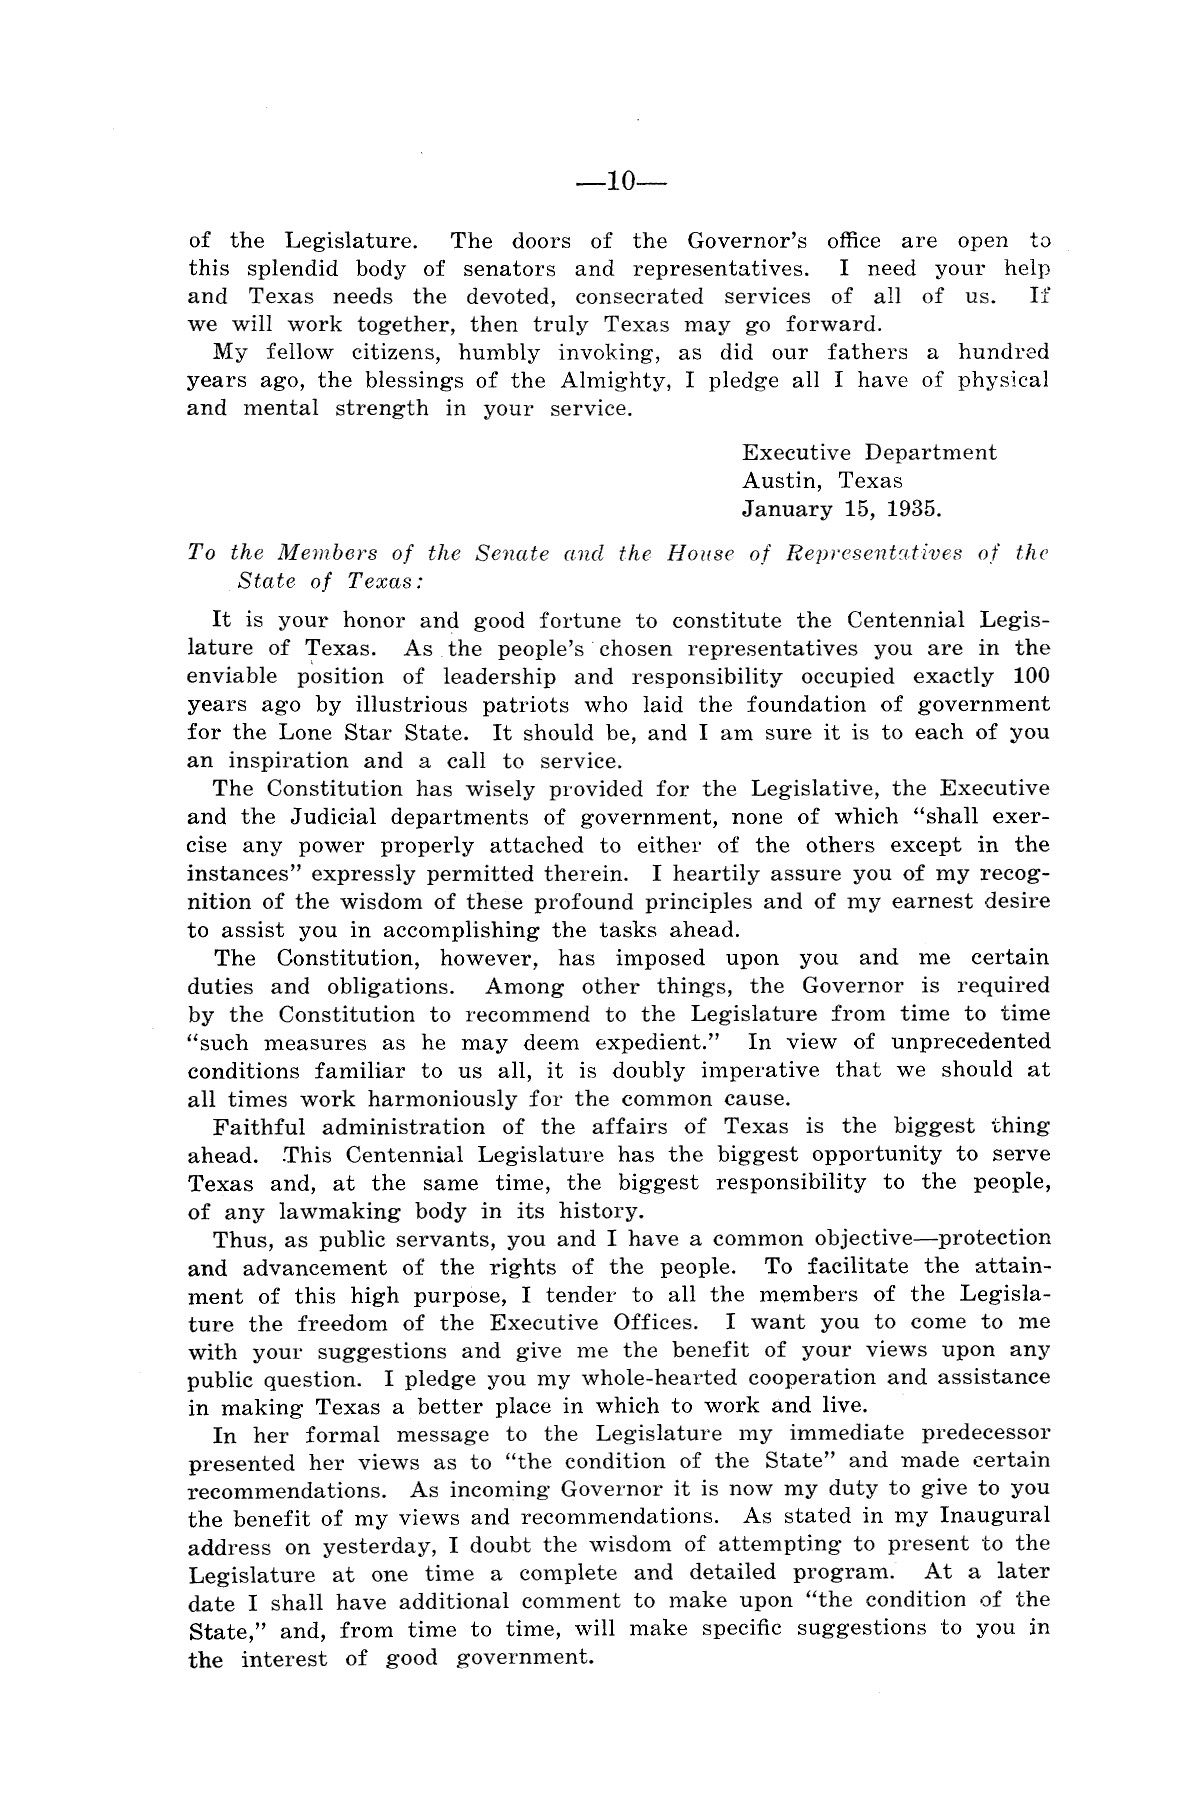 Legislative Messages of Hon. James V. Allred, Governor of Texas 1935-1939
                                                
                                                    [Sequence #]: 9 of 263
                                                